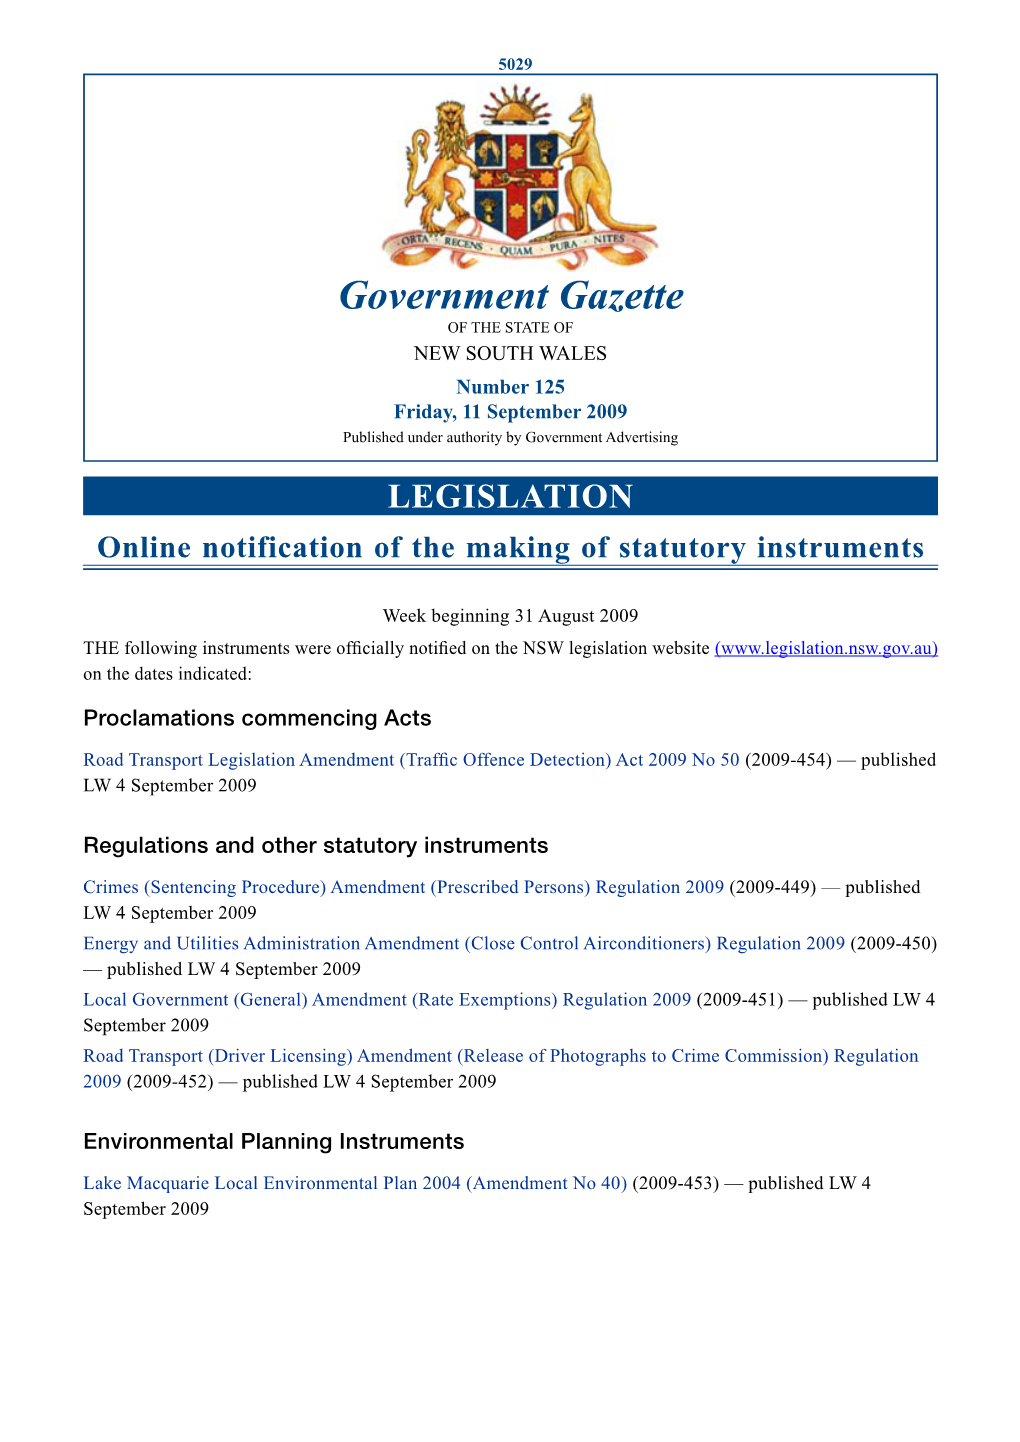 Government Gazette of the STATE of NEW SOUTH WALES Number 125 Friday, 11 September 2009 Published Under Authority by Government Advertising